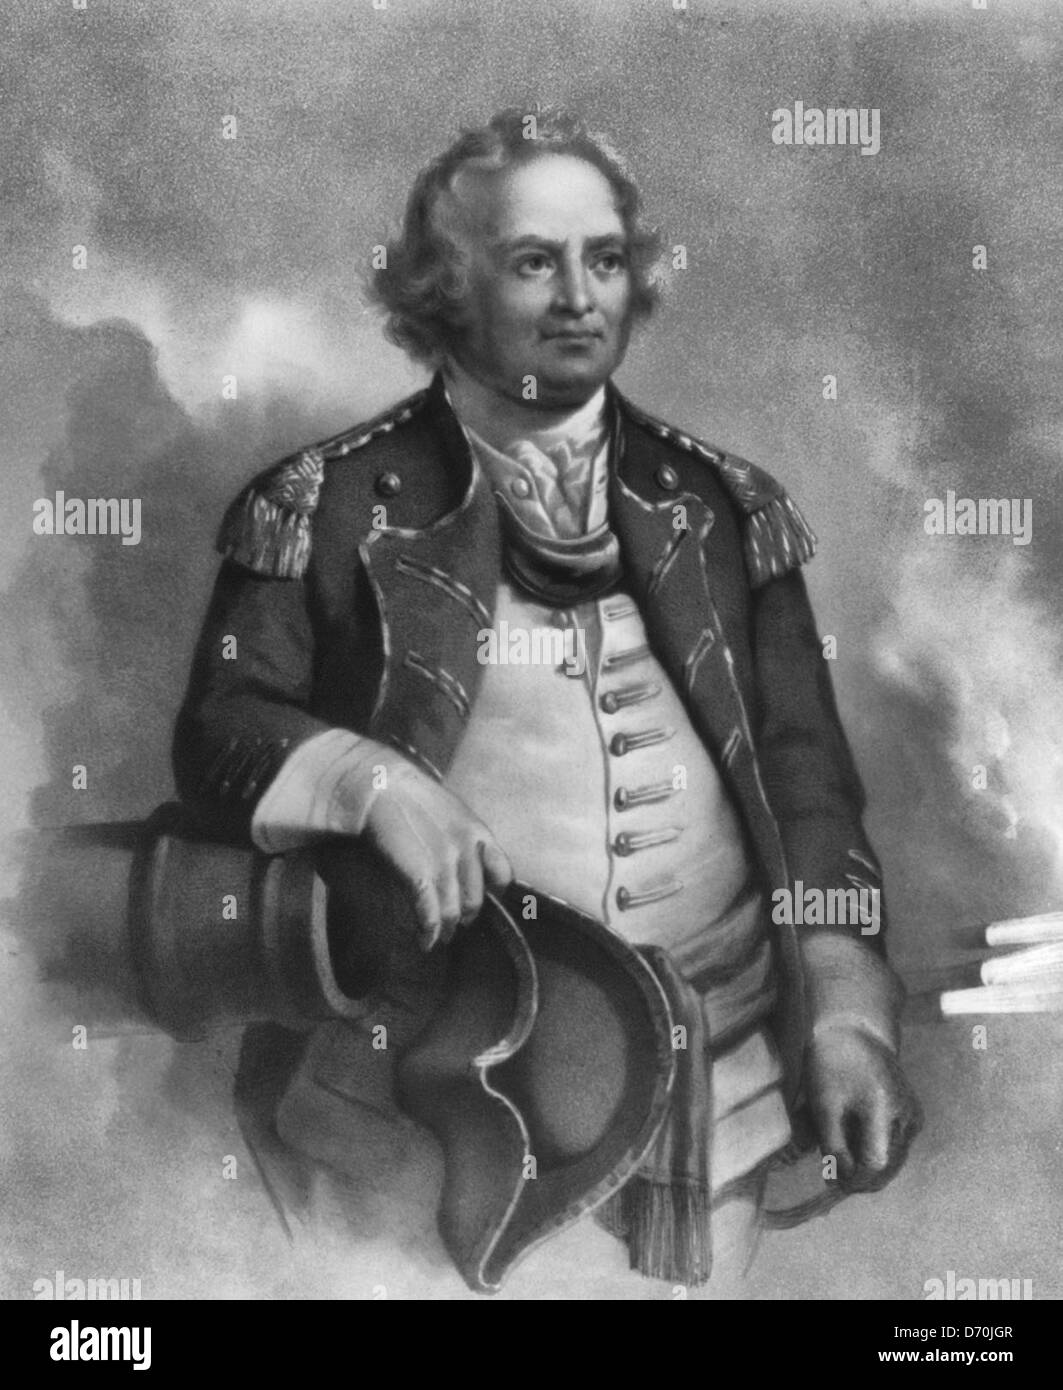 Major General Israel Putnam. 'He dared to lead where any dared to follow' - USA Revolutionary War General Stock Photo